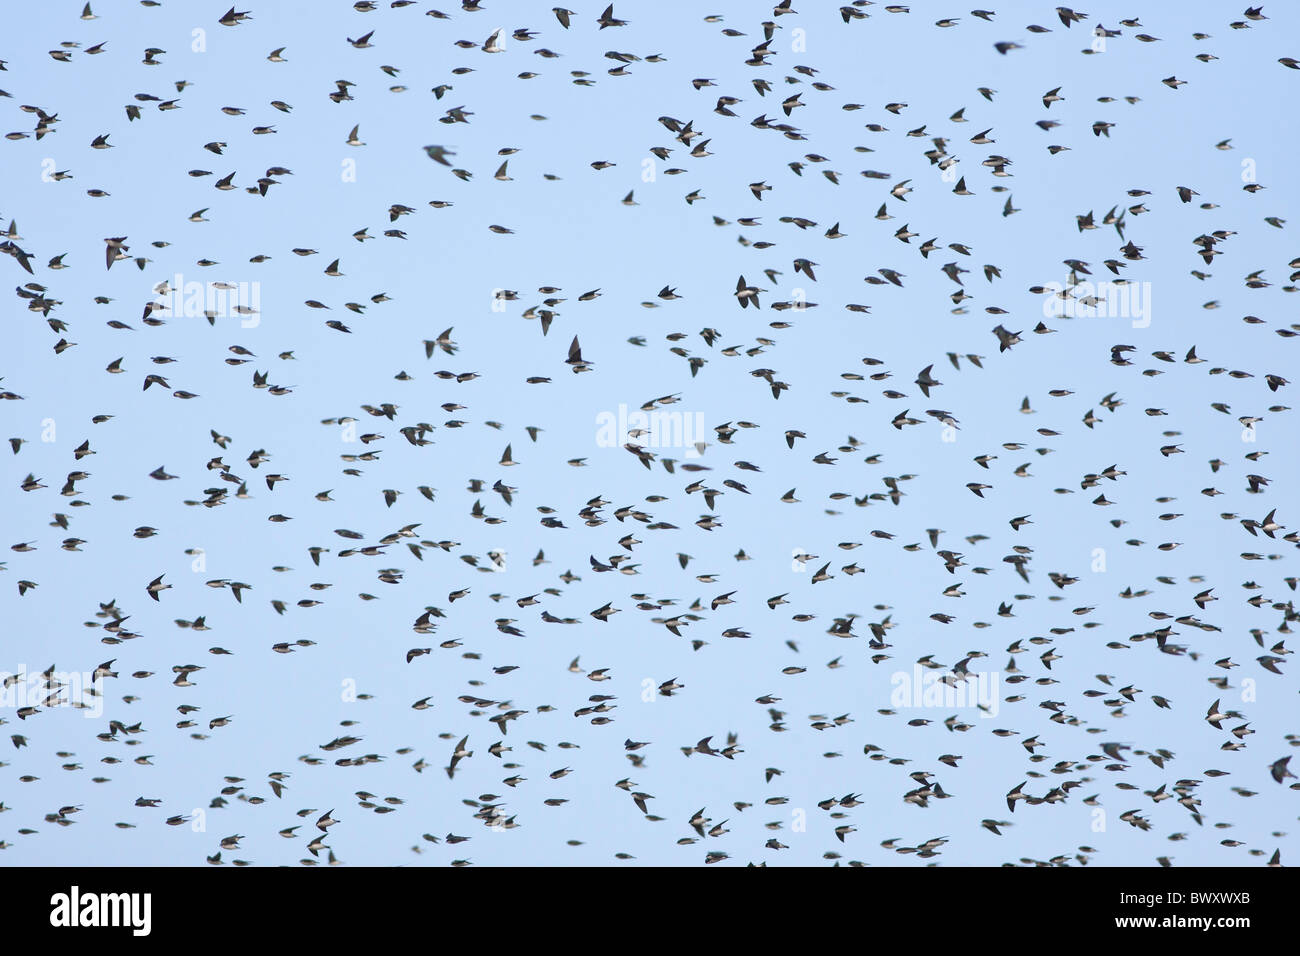 A migrating flock of Tree Swallows at Cape May New Jersey Stock Photo